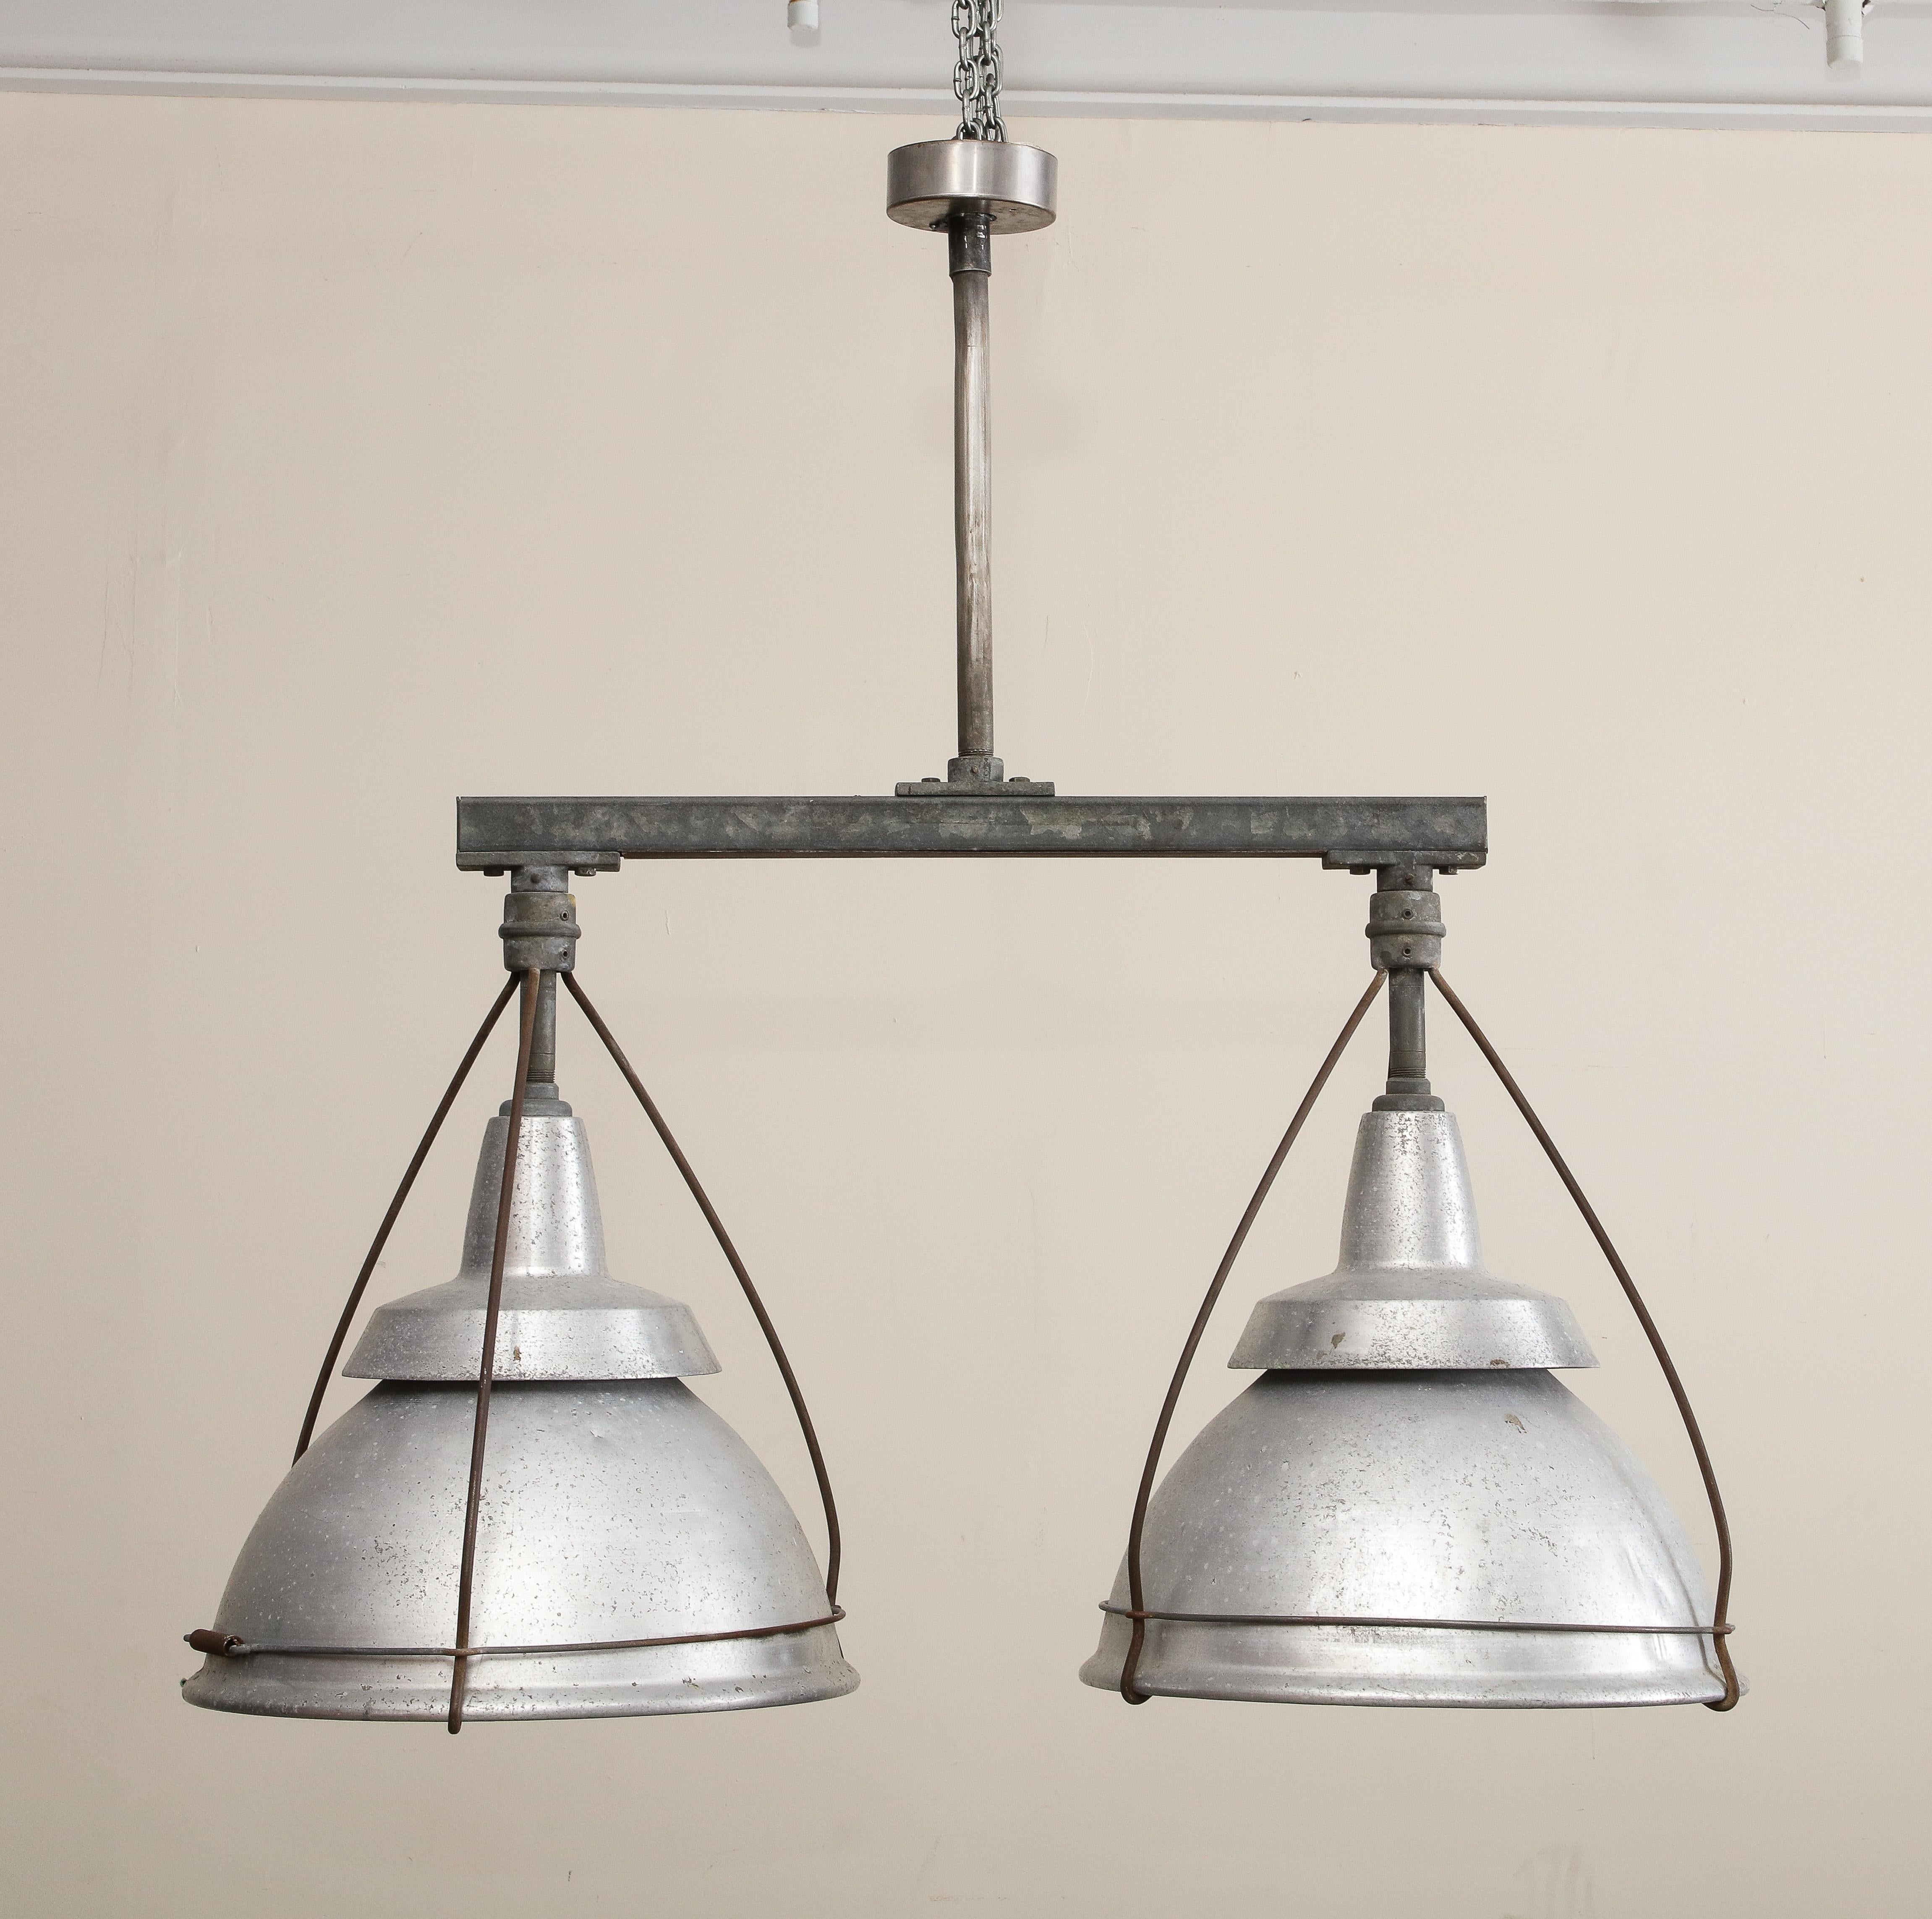 Large industrial double pendant light, c. 1920. Ceiling mounted single canopy, wired for USA and in working condition. 

44